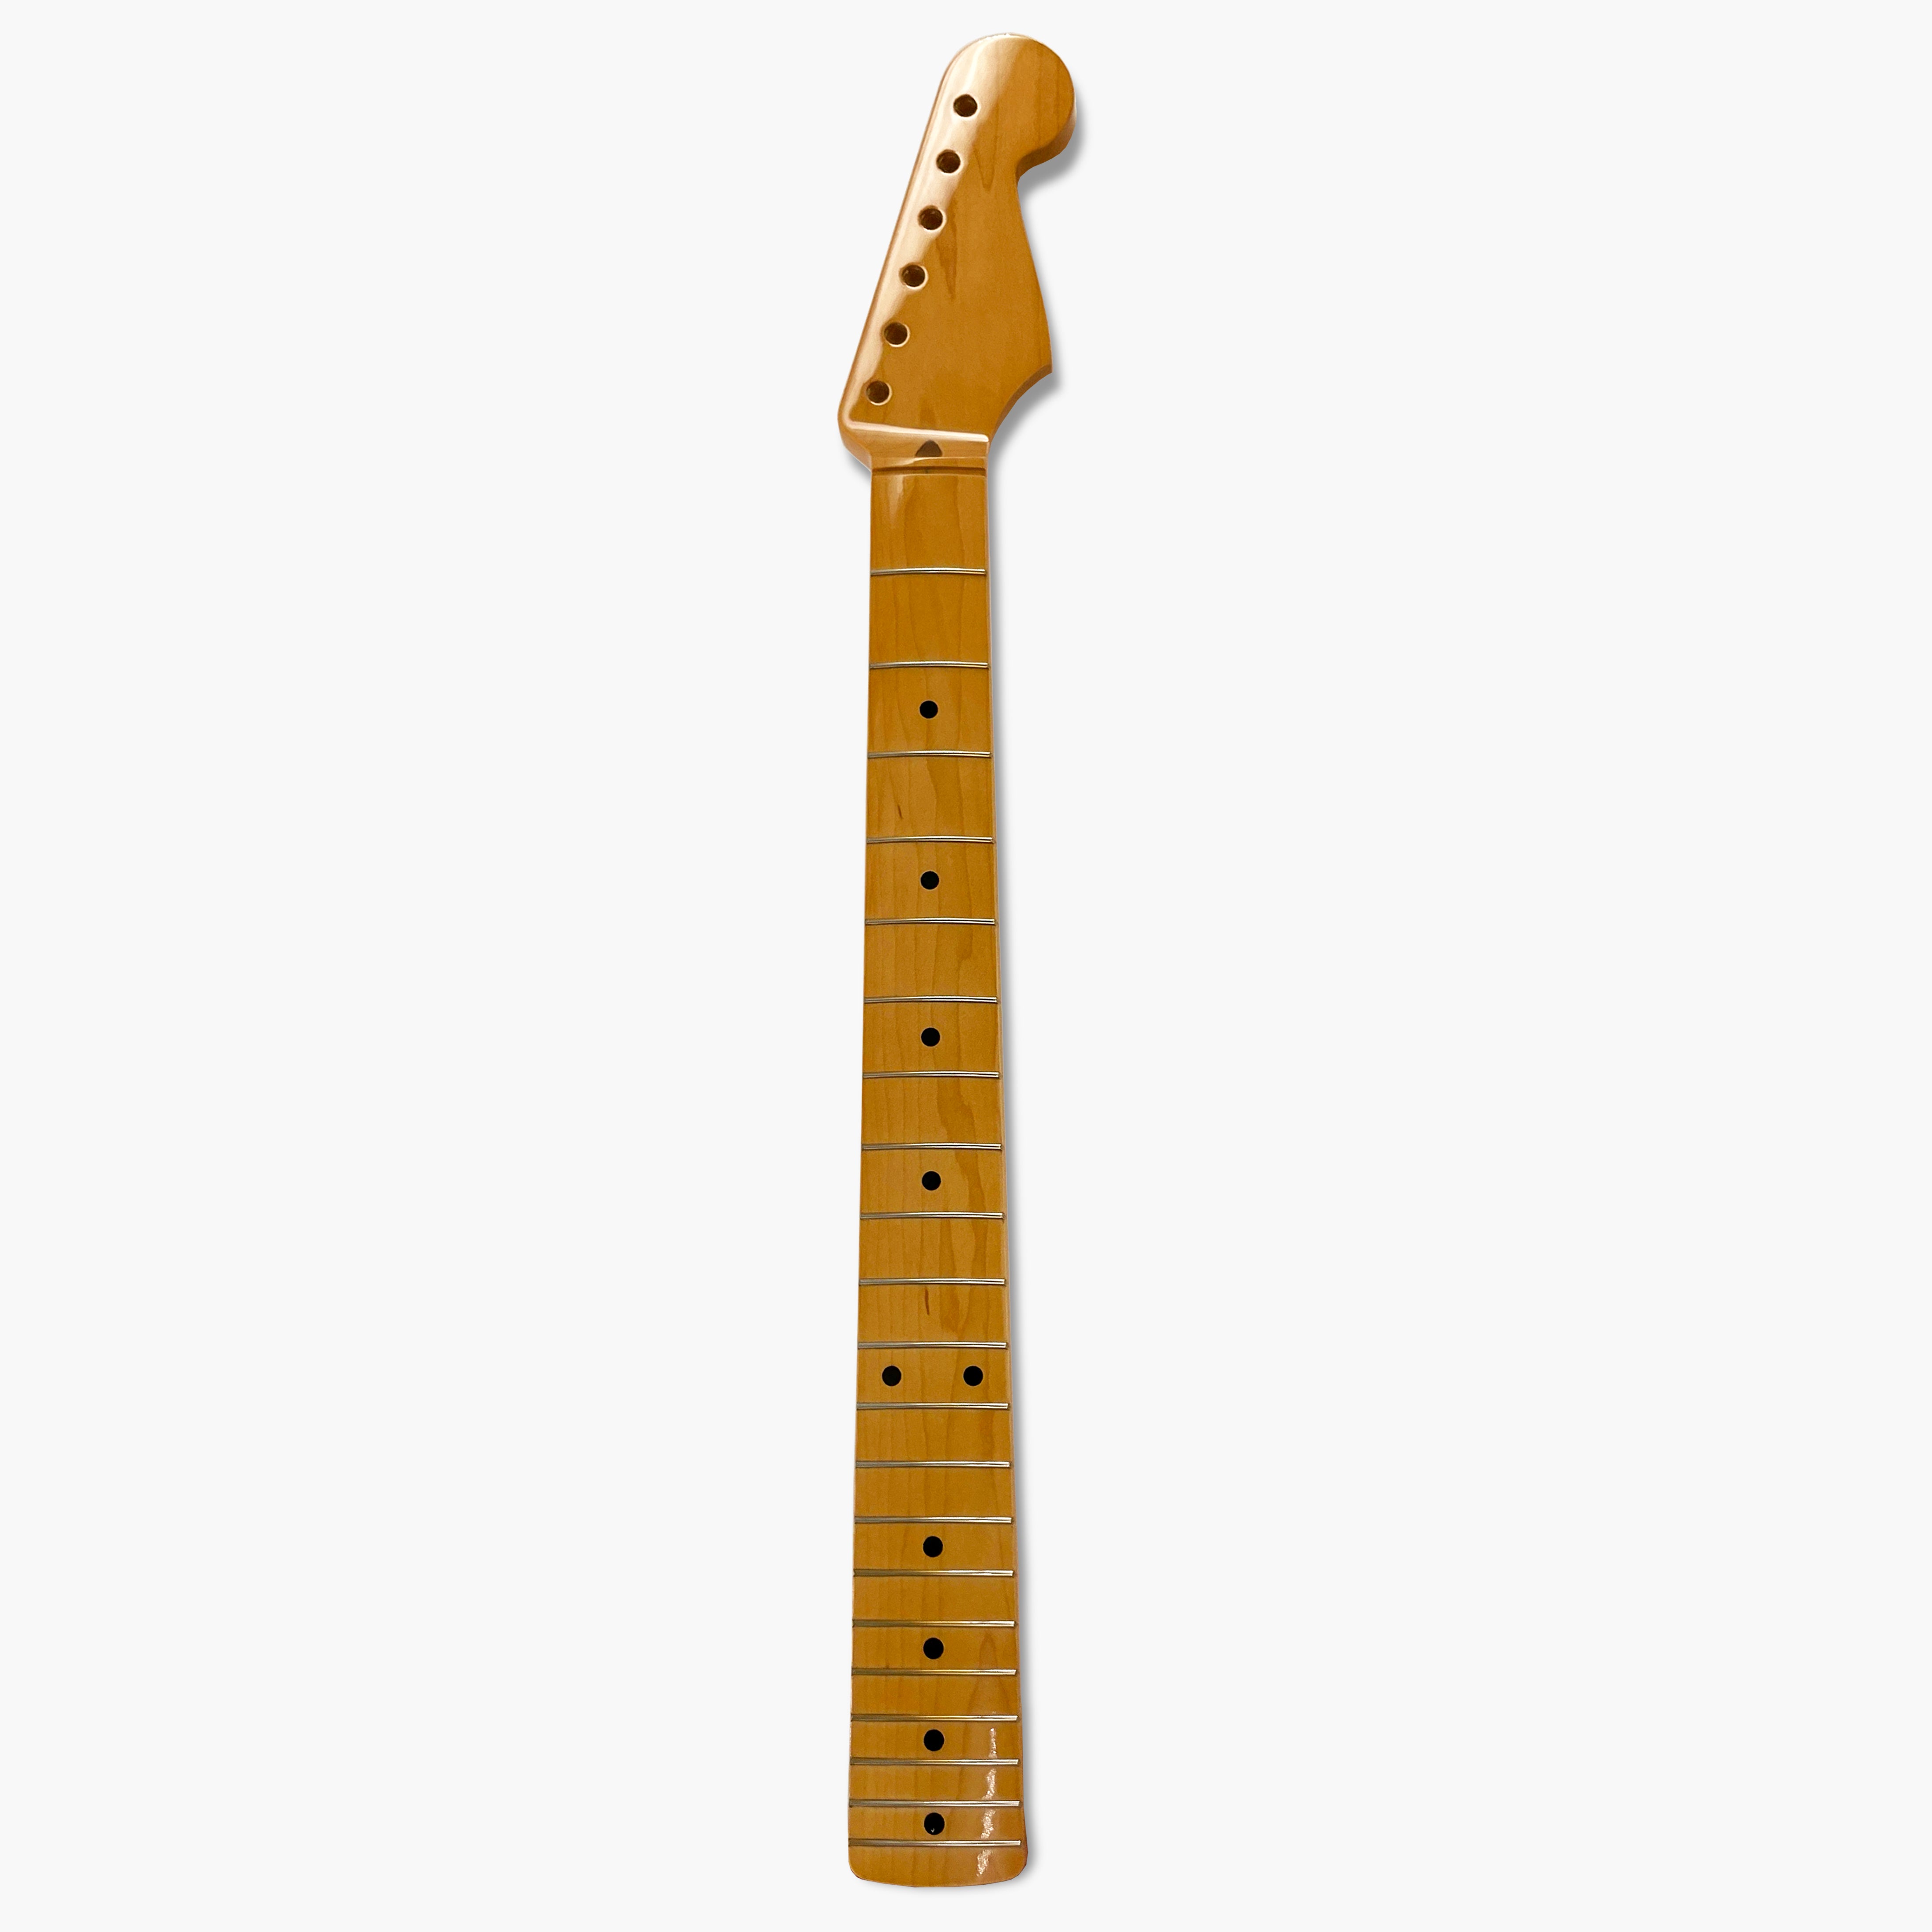 Allparts “Licensed by Fender®” SMNF Replacement Neck for Stratocaster®